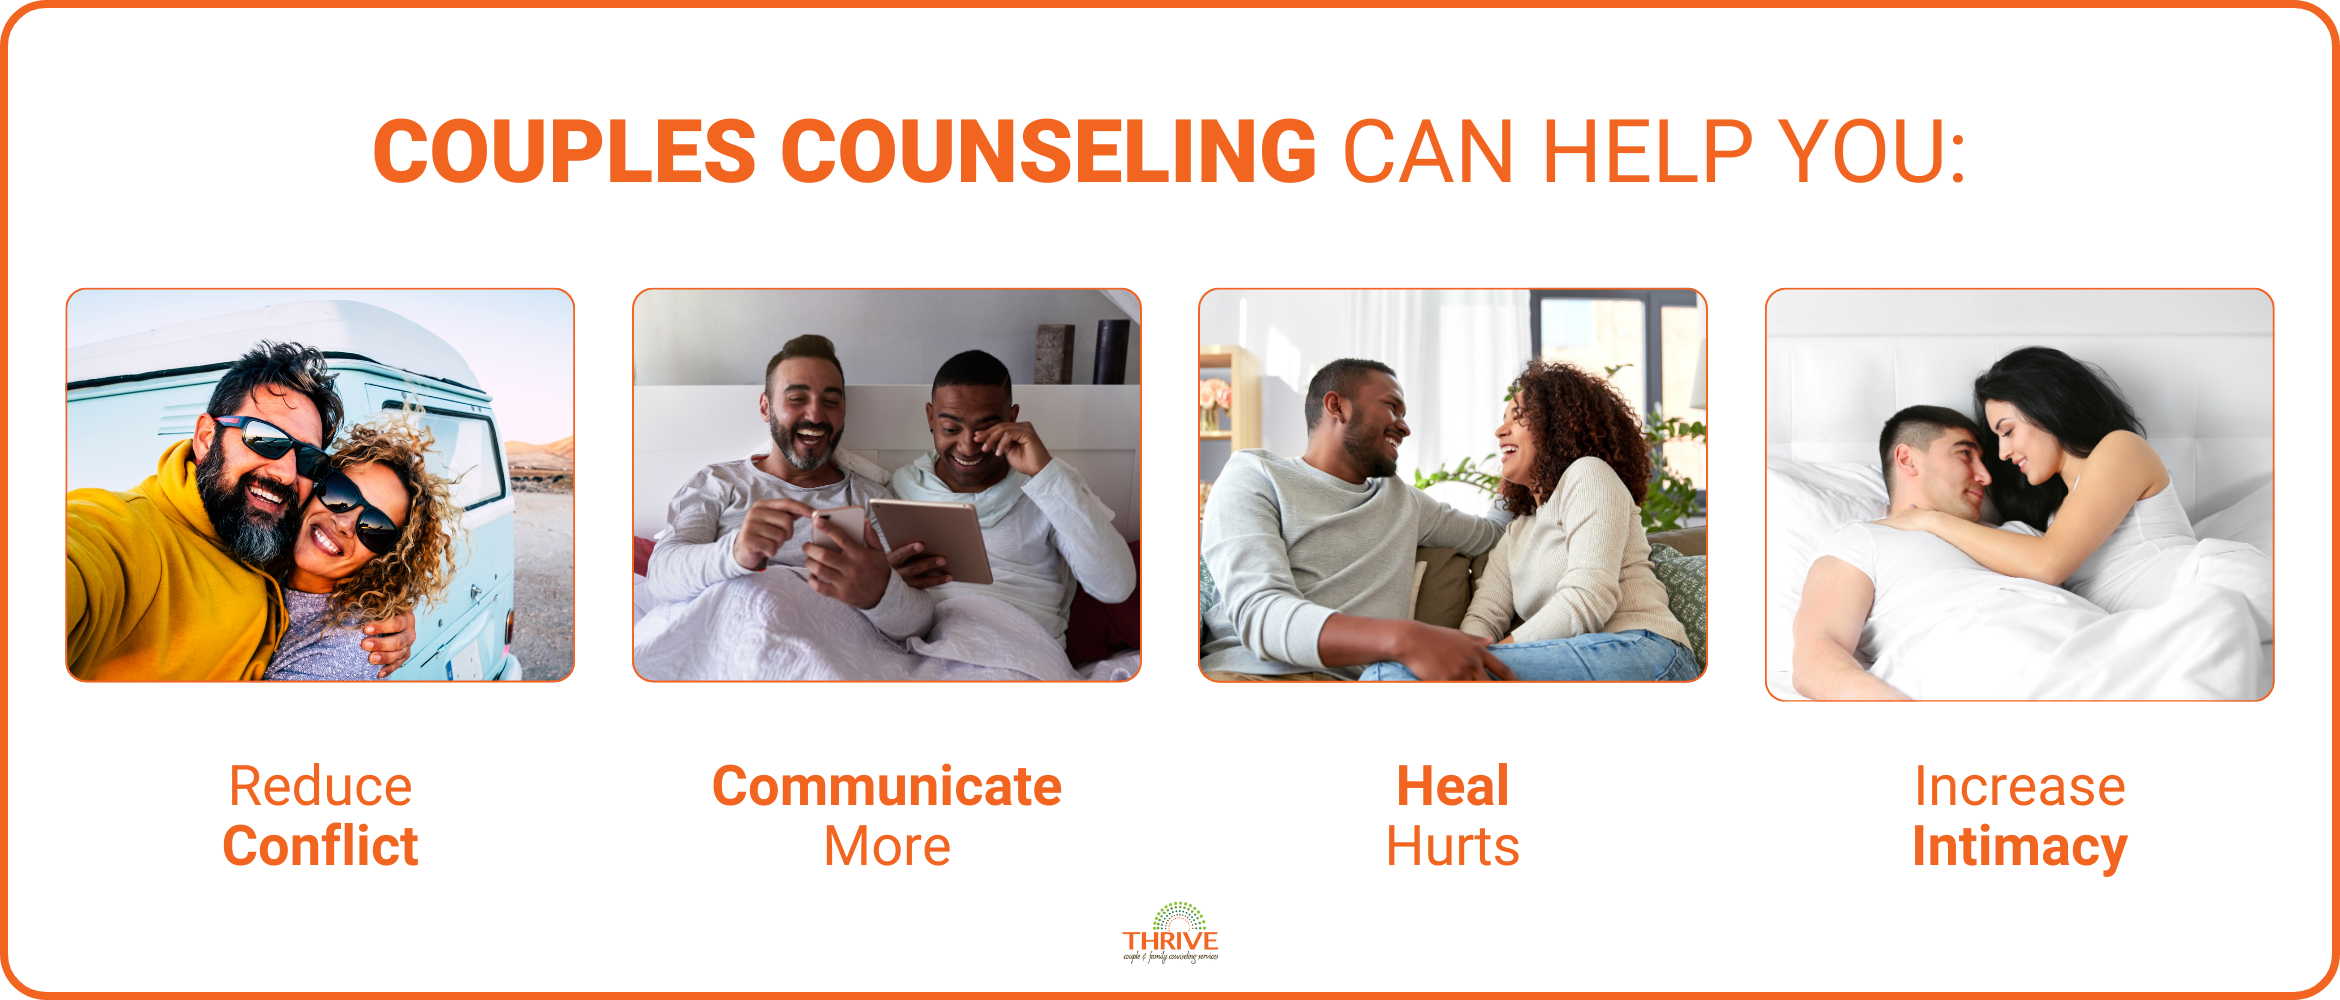 Couples Counseling at Thrive Couple and Family Counseling Services in Centennial can help you reduce conflict, heal hurts, communicate more, and increase intimacy.